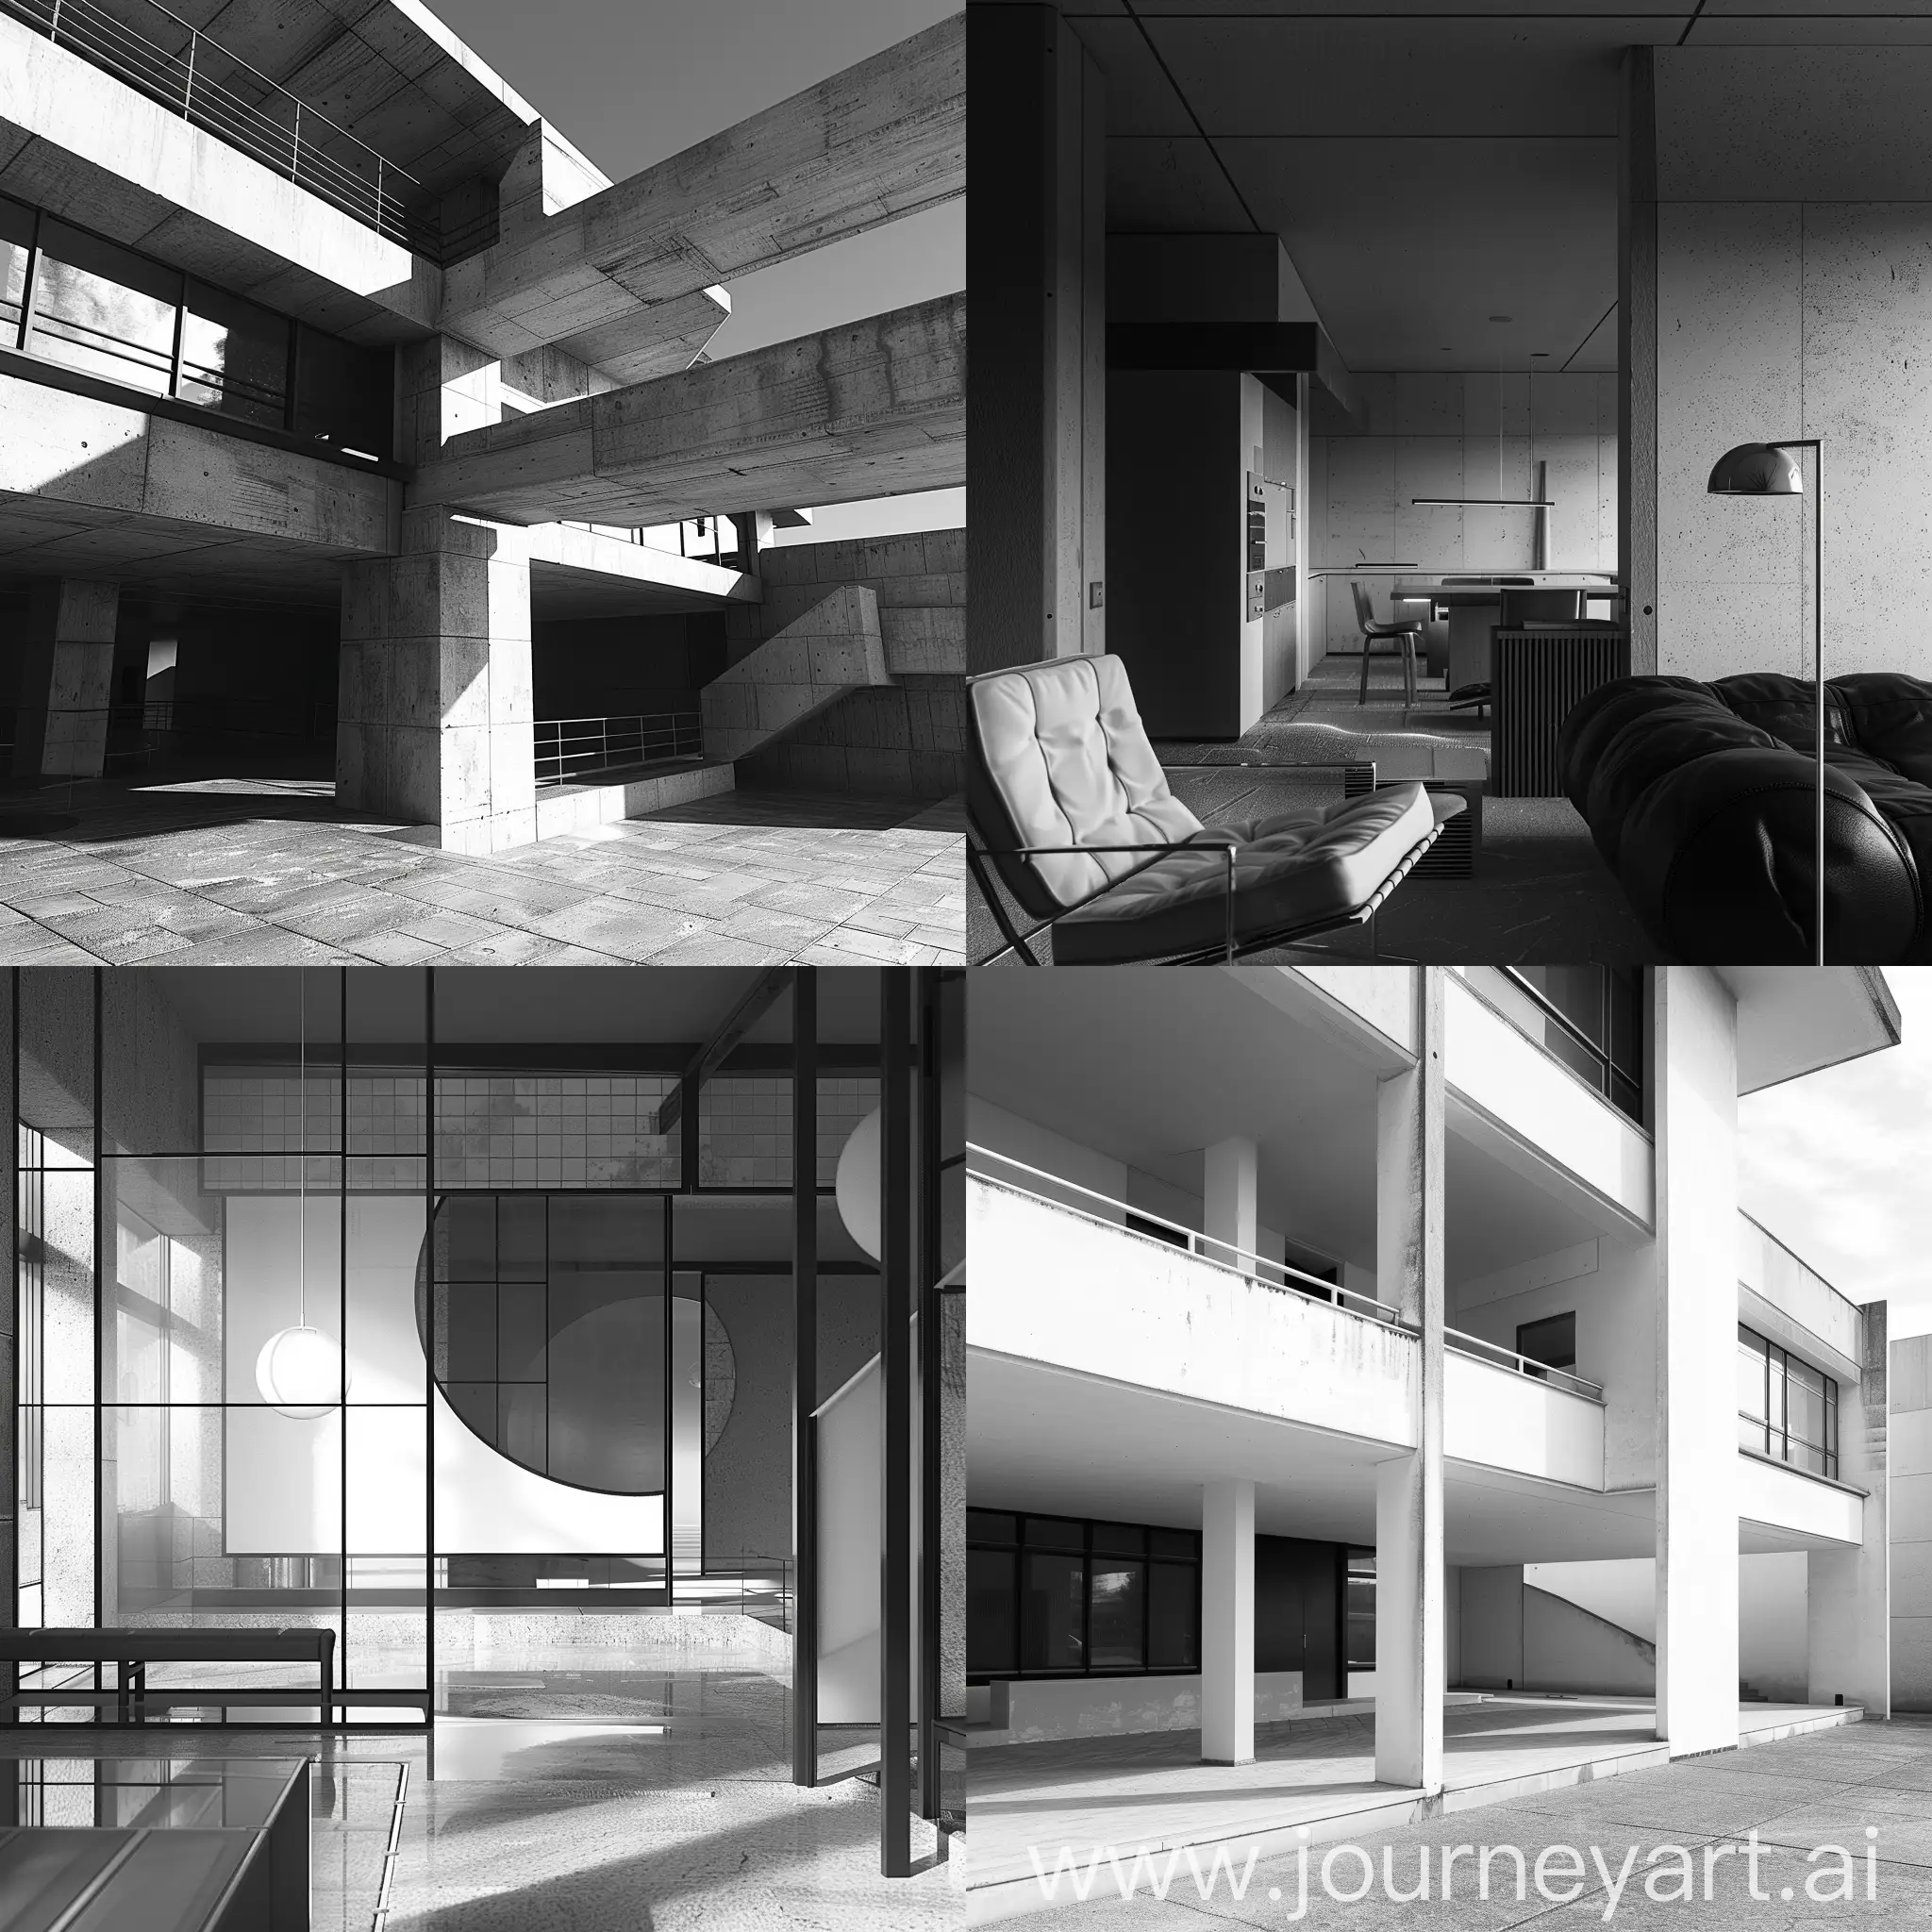 Create a photorealistic Le Corbusier image. Please use black and white portrait format. 4k quality. Hyper-detailed. 35mm footage